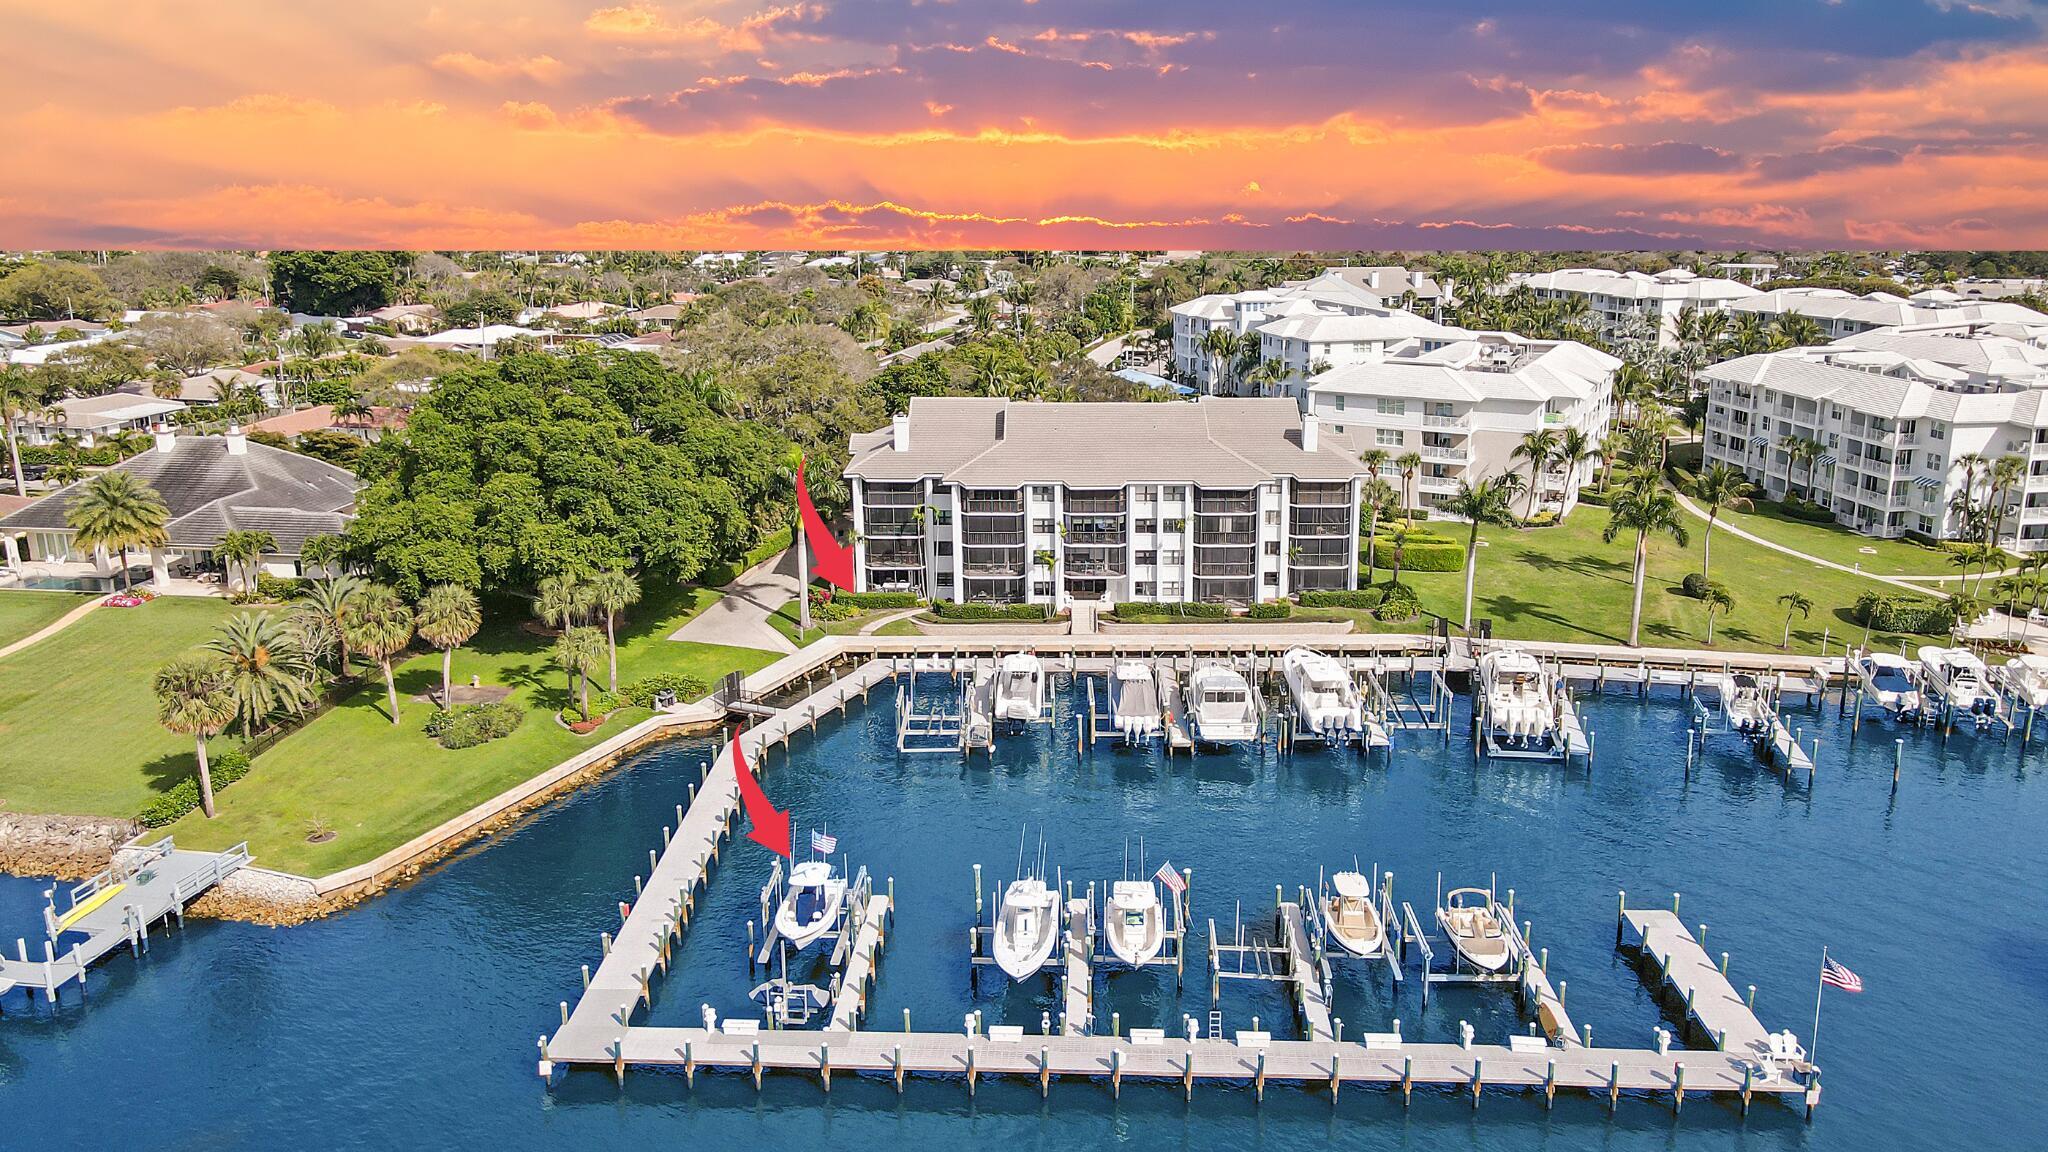 Rarely available, fully renovated 3 bed/2 bath end unit in Bay Colony with unobstructed intracoastal & marina views! Included is also a 42 ft. slip with a 20,000lb Neptune G6 walk around boat lift & a rotating personal watercraft lift! No stone was left unturned when remodeling this unit! Tile flooring throughout, full impact glass, plantation shutters, electric shades, smart lighting, tankless hot water heater, a built-in home office, private wine bar, a custom storage closet/shop with a brand-new freezer, stainless appliances & pot filler in the kitchen with custom cabinetry & countertops, & so much more! There are also private front & back entrances, which gives this condo the feeling of a private home. Enjoy amazing sunsets every day from this one-of-a-kind direct waterfront oasis!